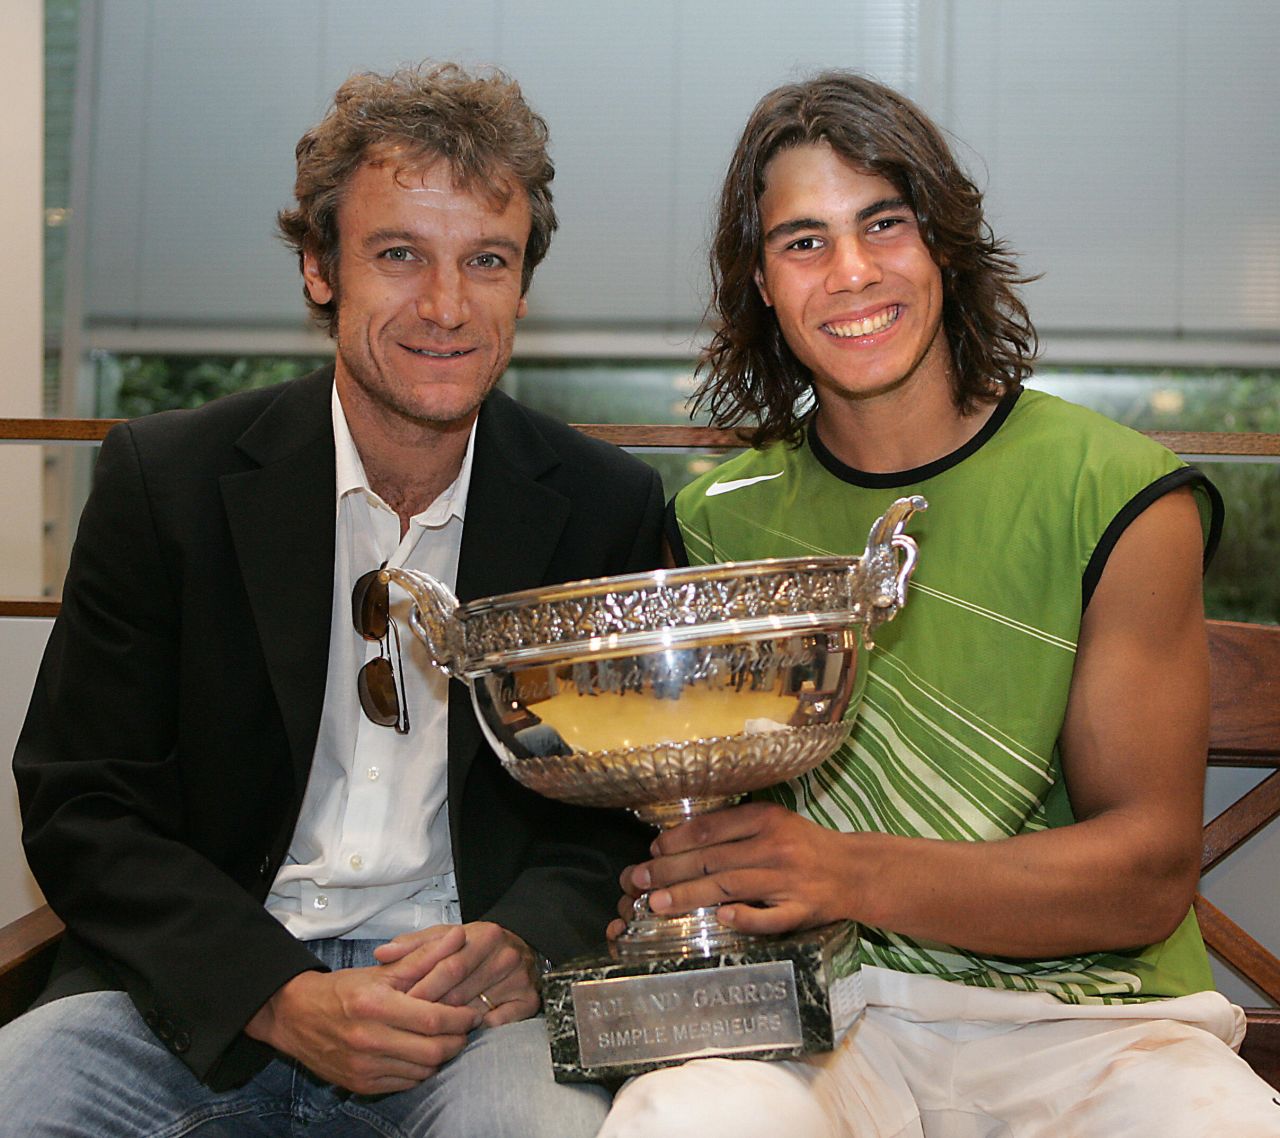 Nadal won the French Open title on his first attempt in 2005, making him only the second male player to do so after Sweden's Mats Wilander (left) in 1982.